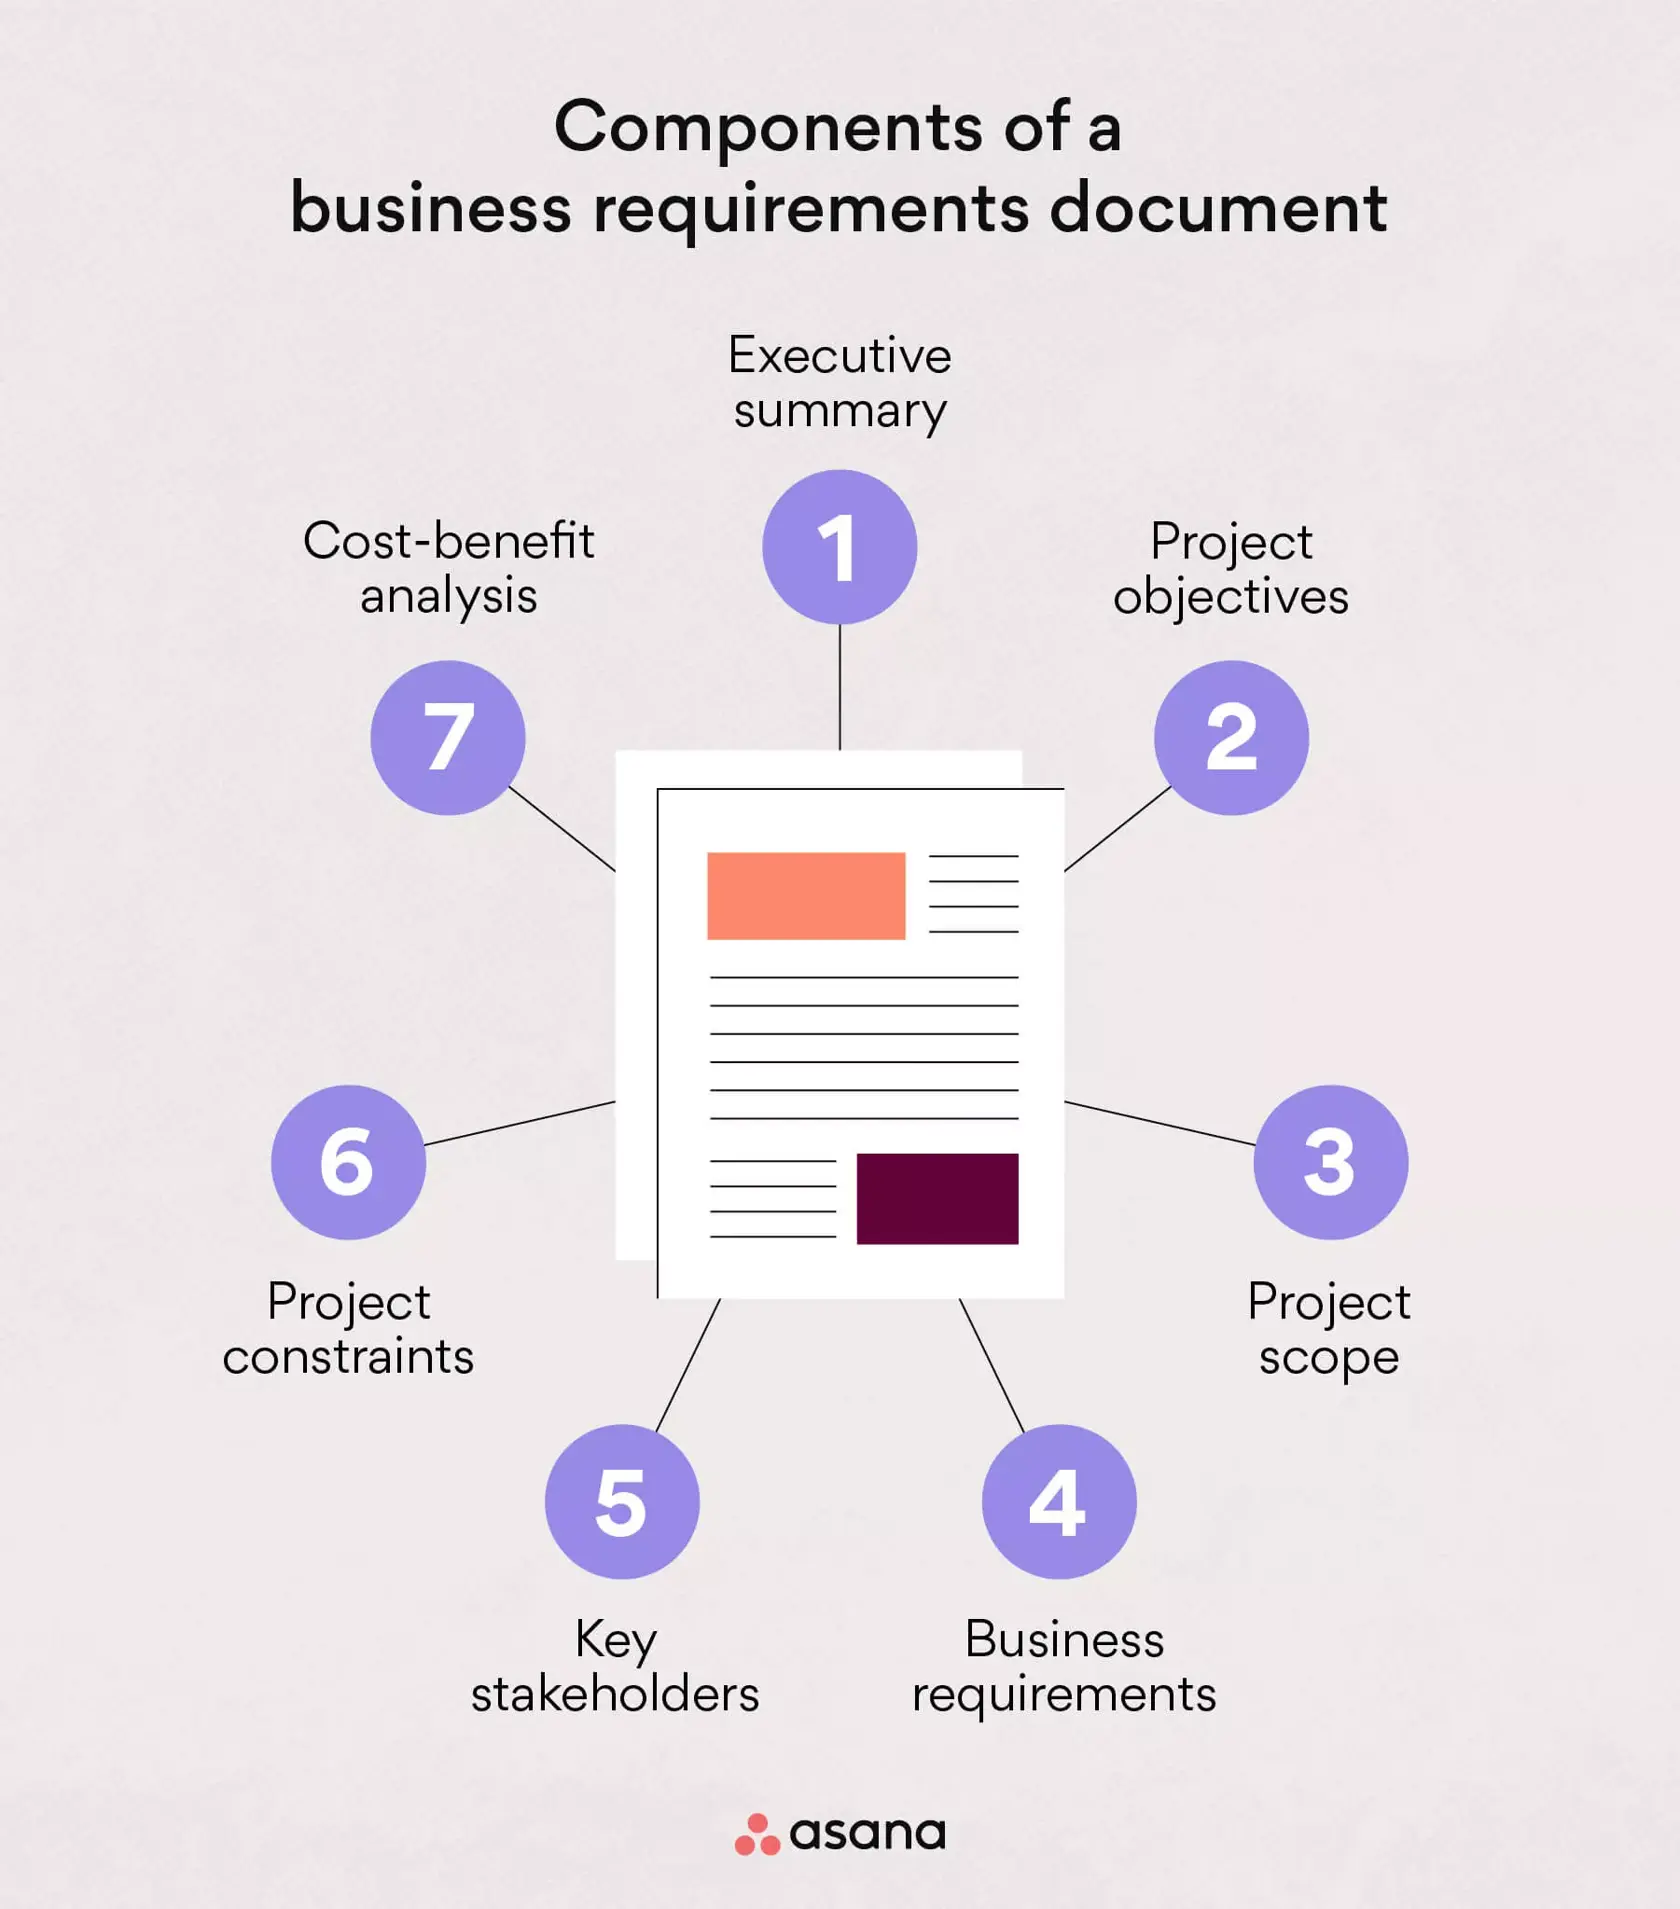 [inline illustration] components of a business requirements document (infographic)